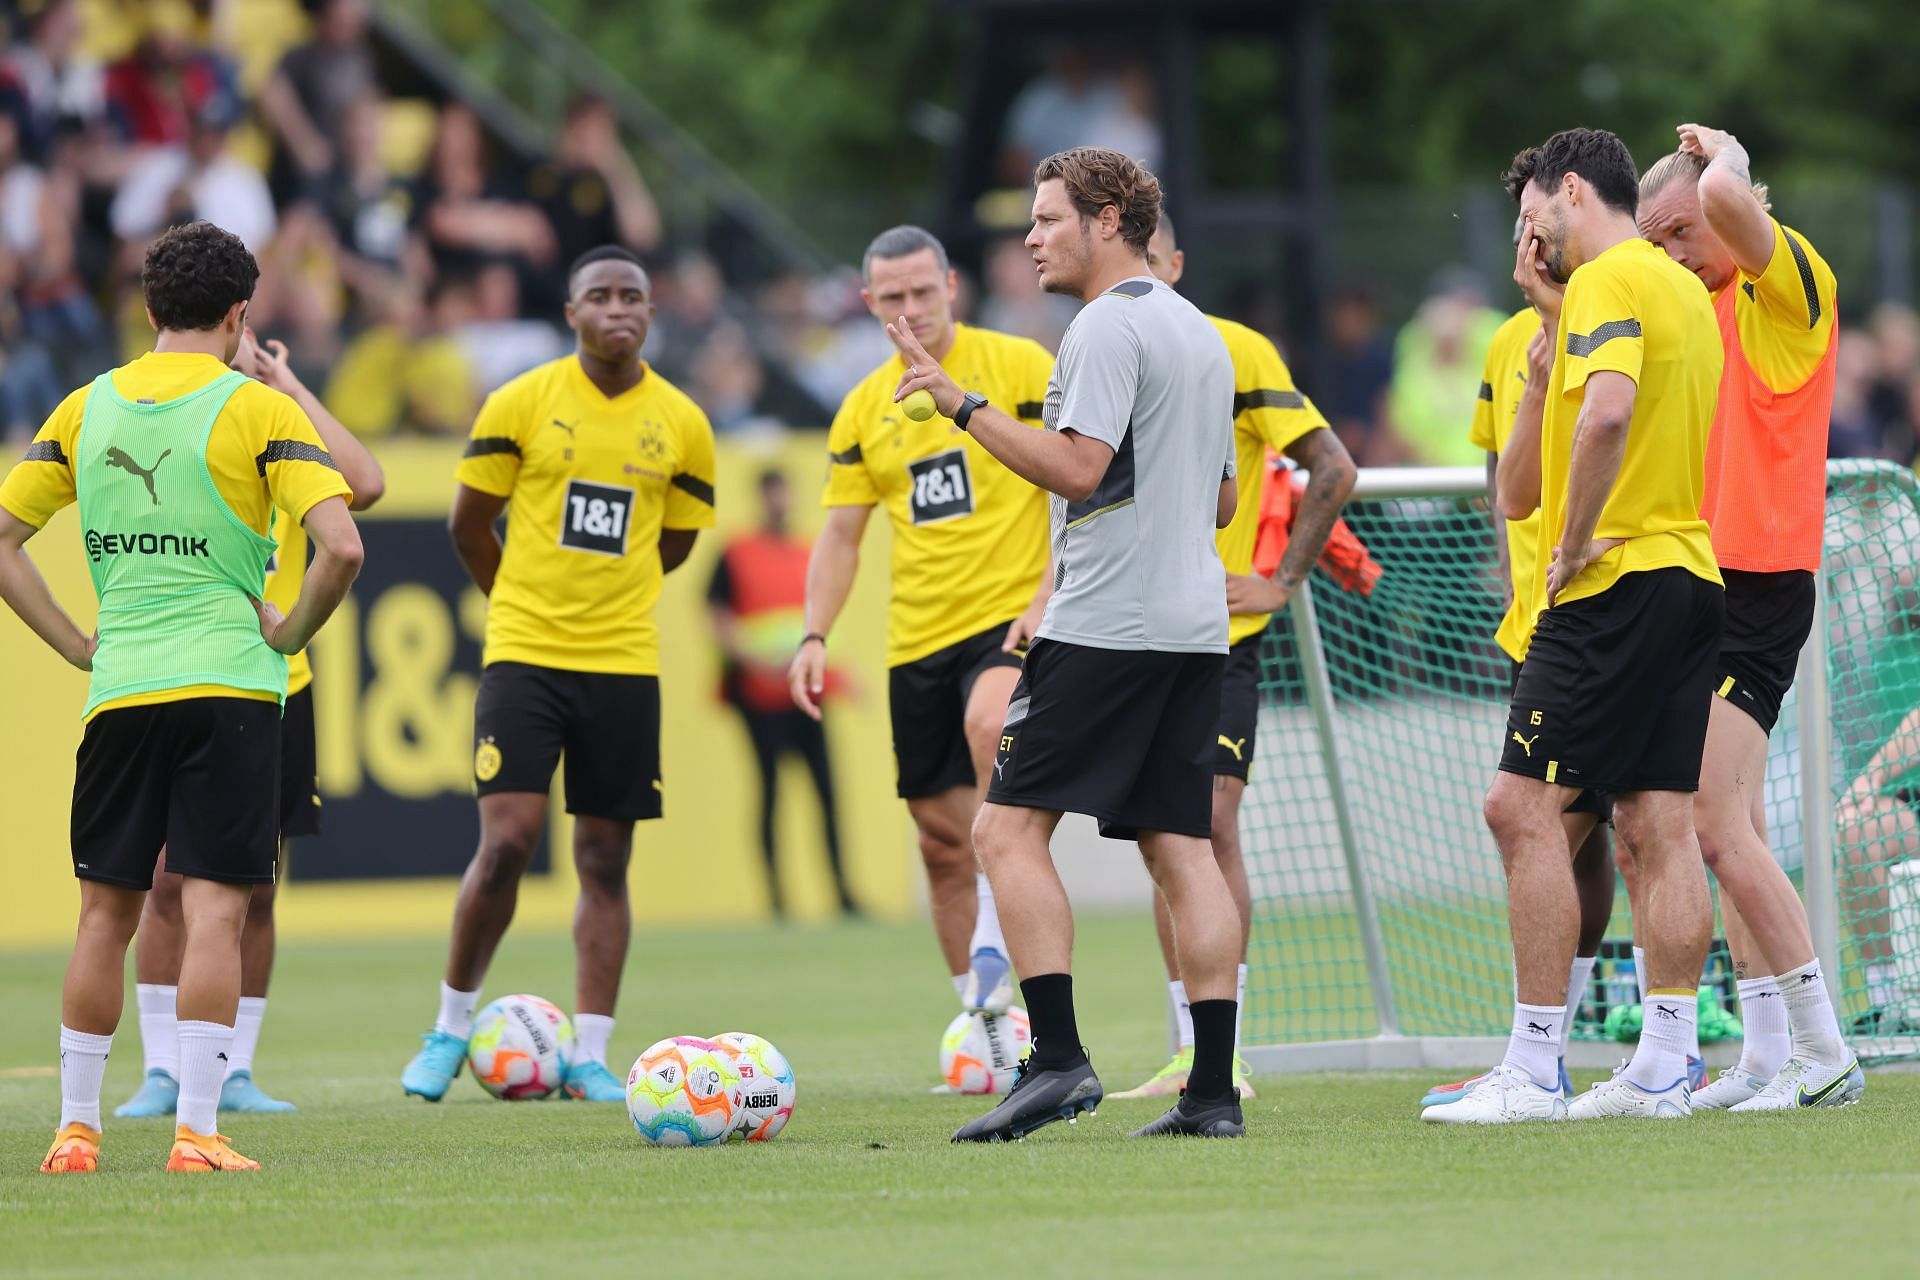 Borussia Dortmund continue their pre-season formalities with a game against Verl on Thursday